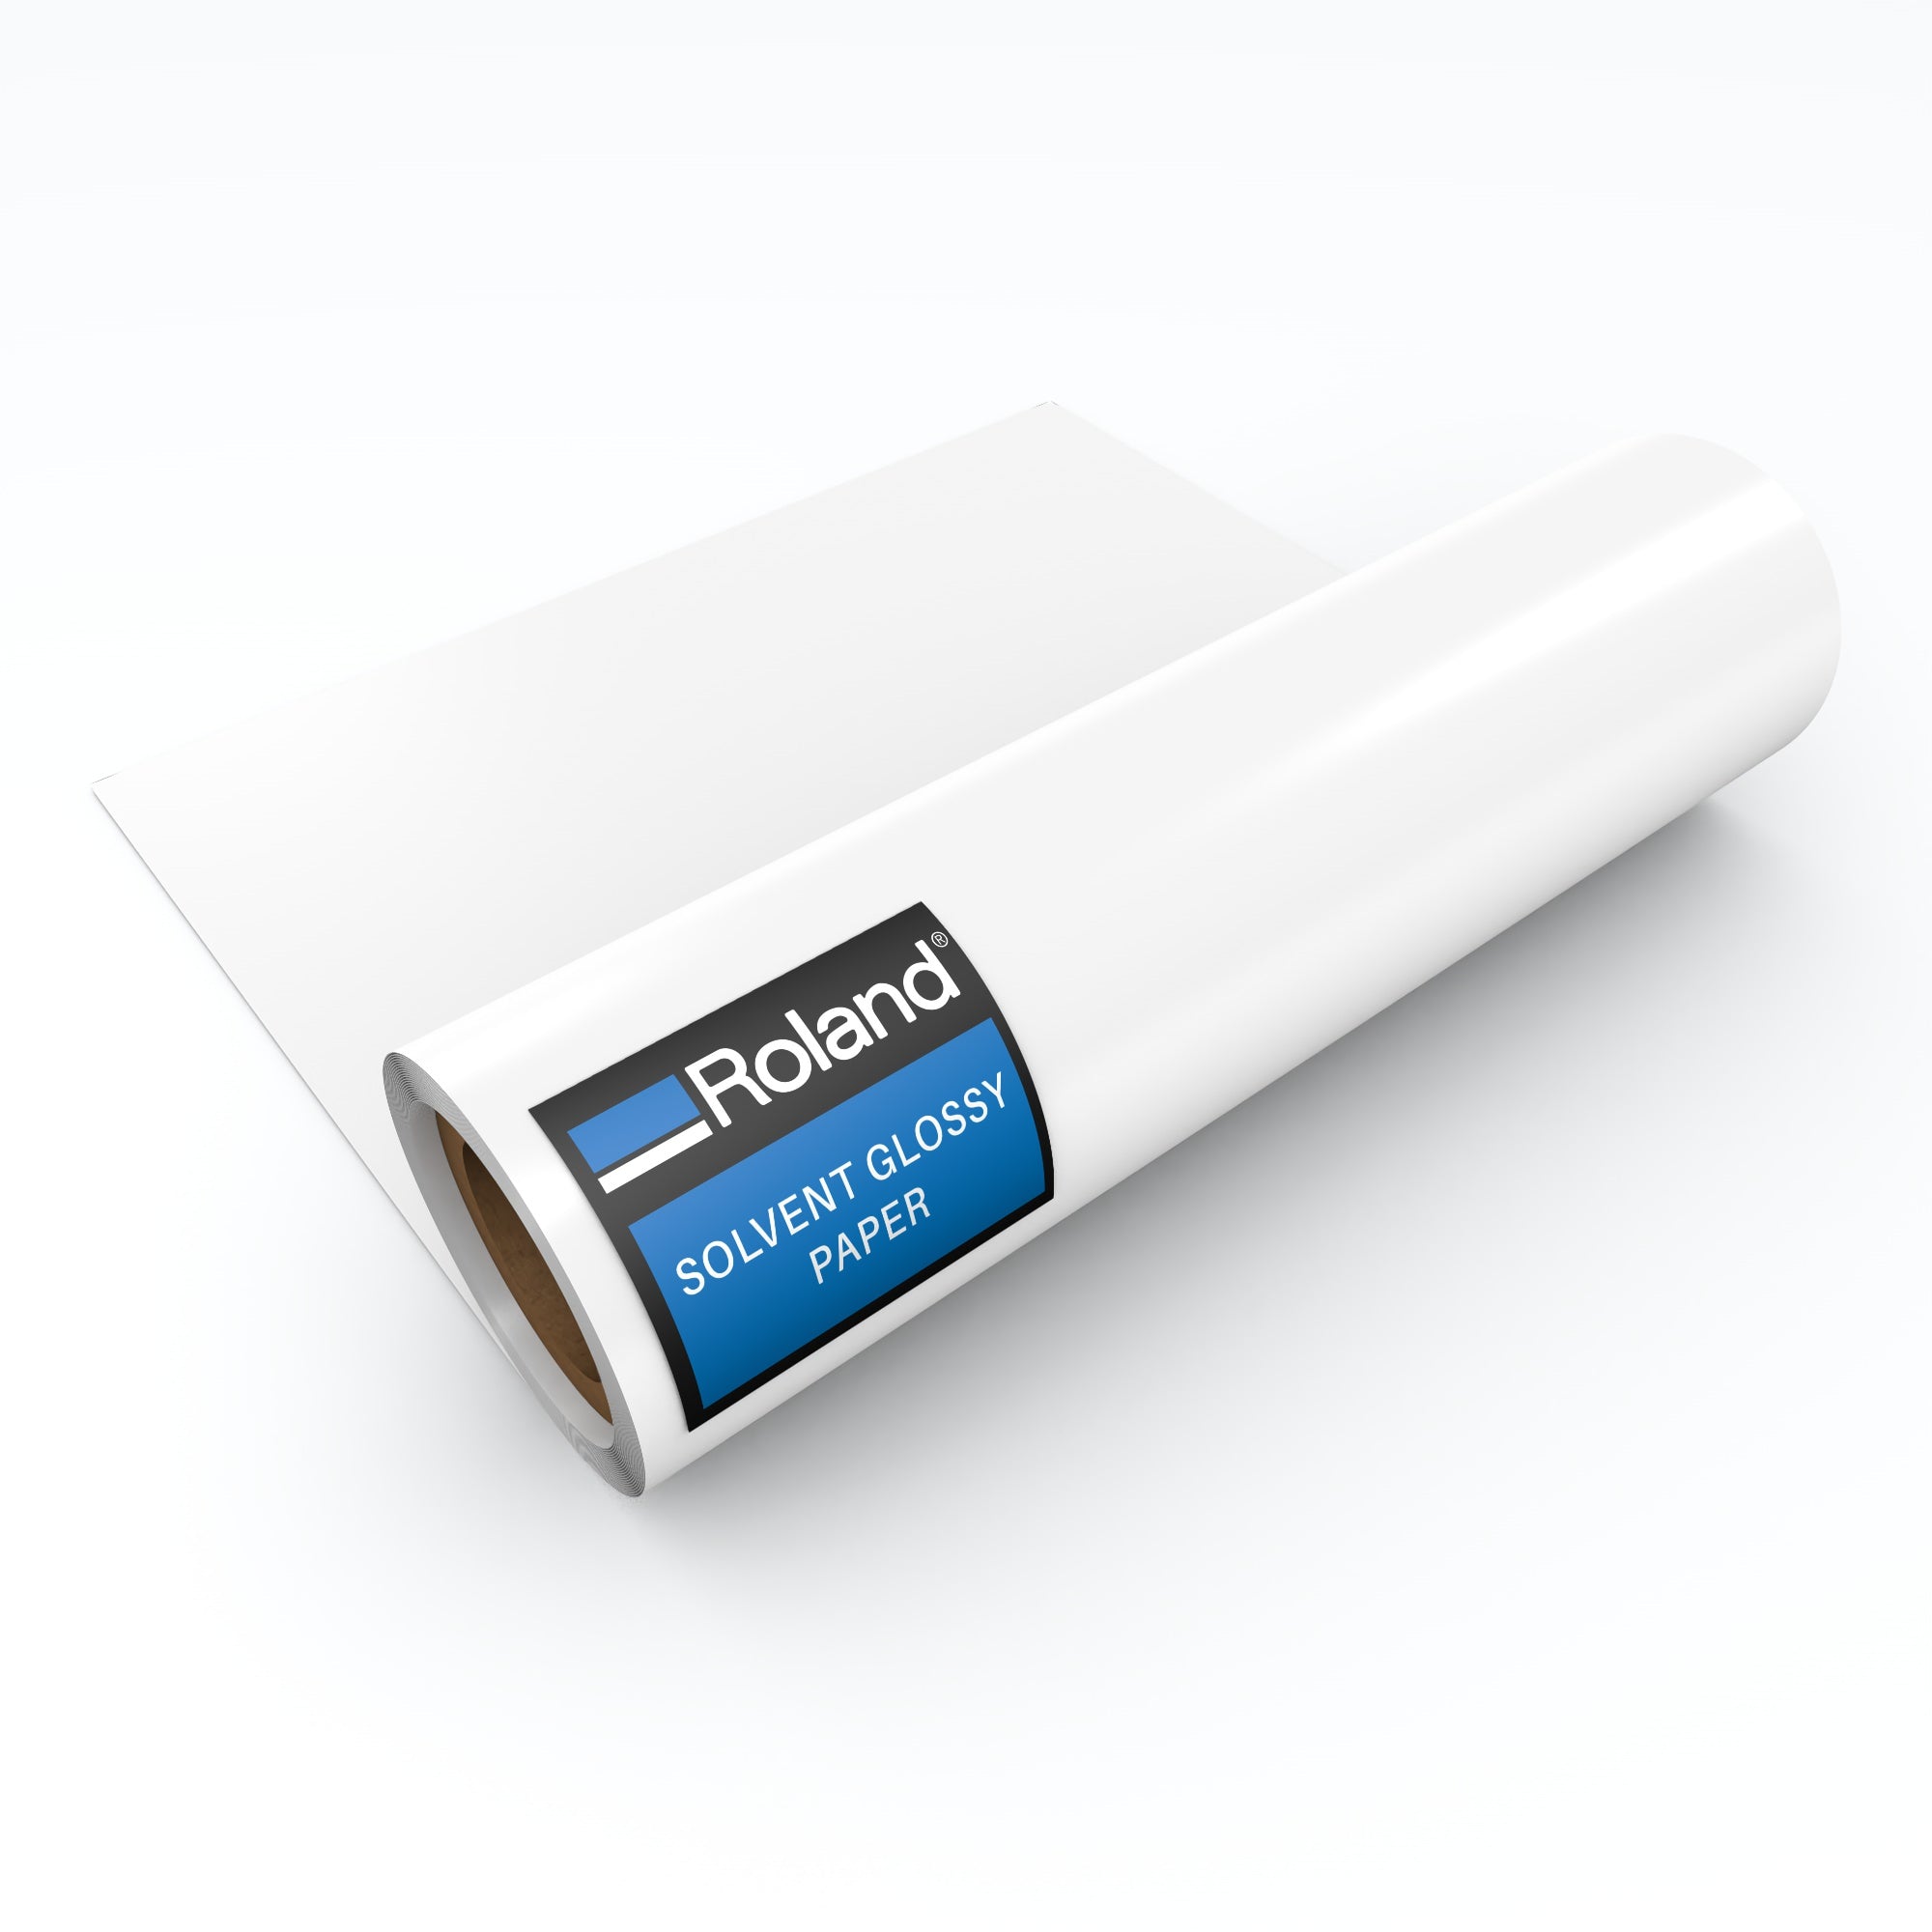 Roland solvent glossy paper 30 inches wide